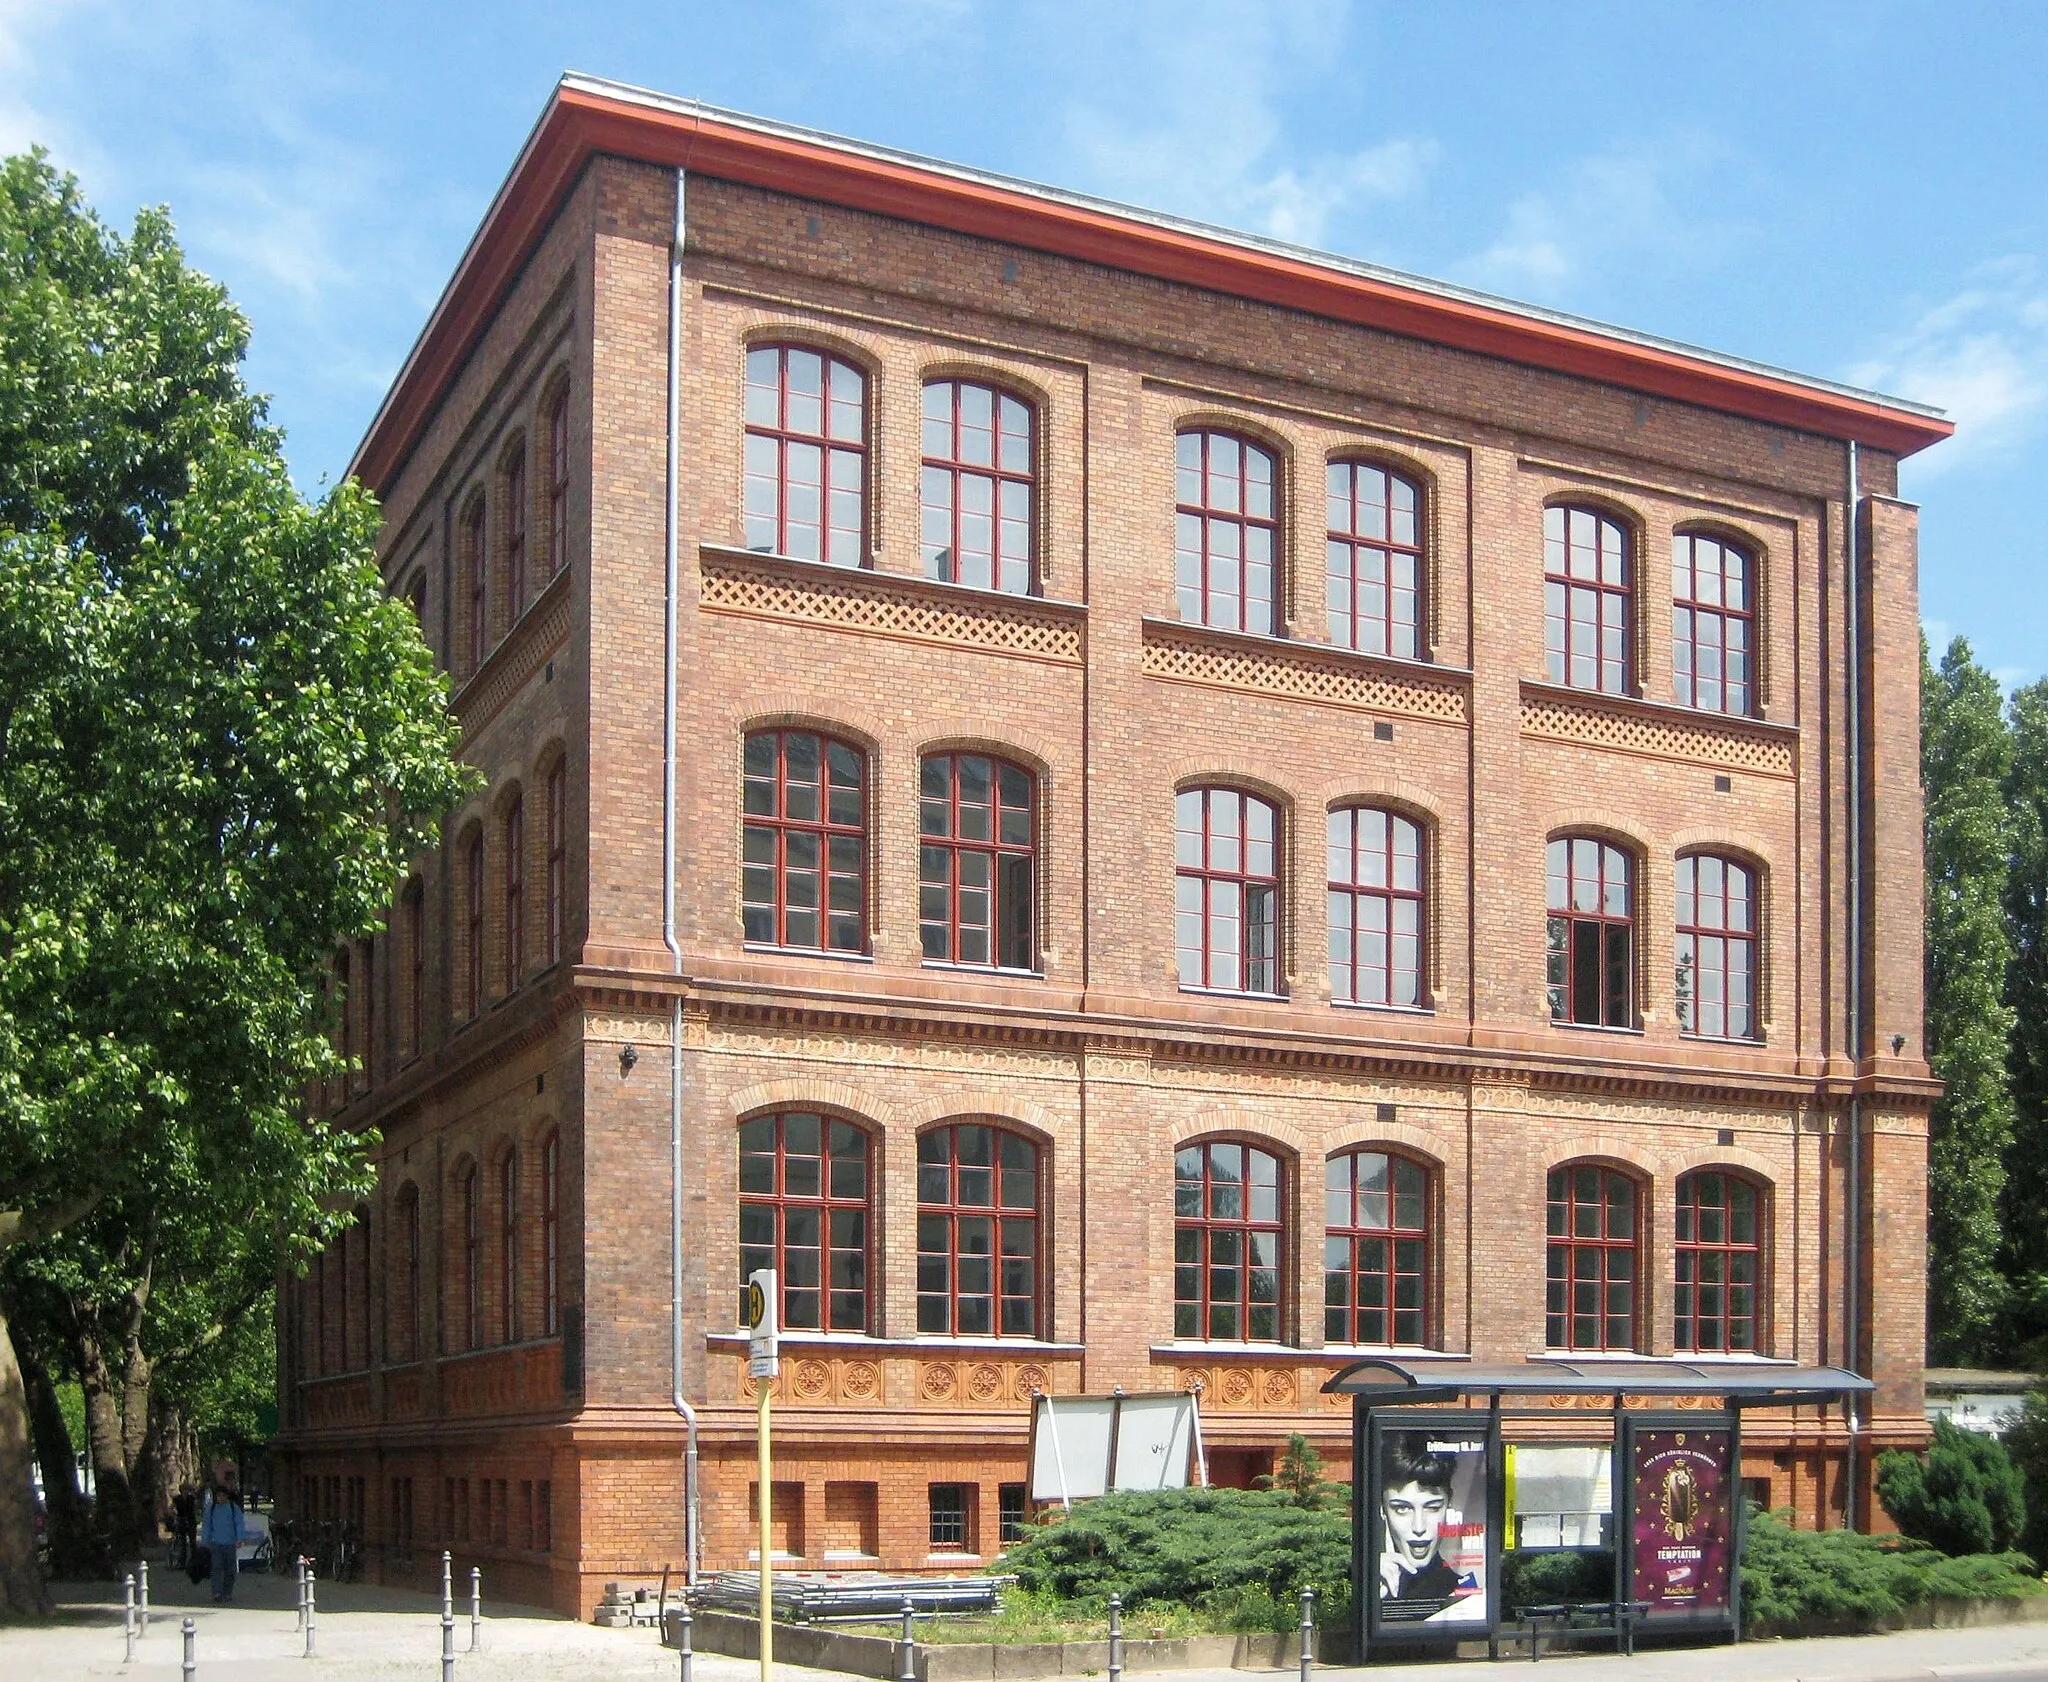 Photo showing: The former Köllnisches Gymnasium (=secondary school) at Wallstraße 42-48, built 1865 by Adolf Gerstenberg, as seen from the corner of Wallstraße and Inselstraße. It used to be a school building with three wings along Inselstraße. After destruction in WWII, only the northern wing along Wallstraße as well as the principal's building, added in 1868 on the same street, are preserved. The buildings are used today by the Music School Fanny Hensel. They have been desiganted as a historic landmark.